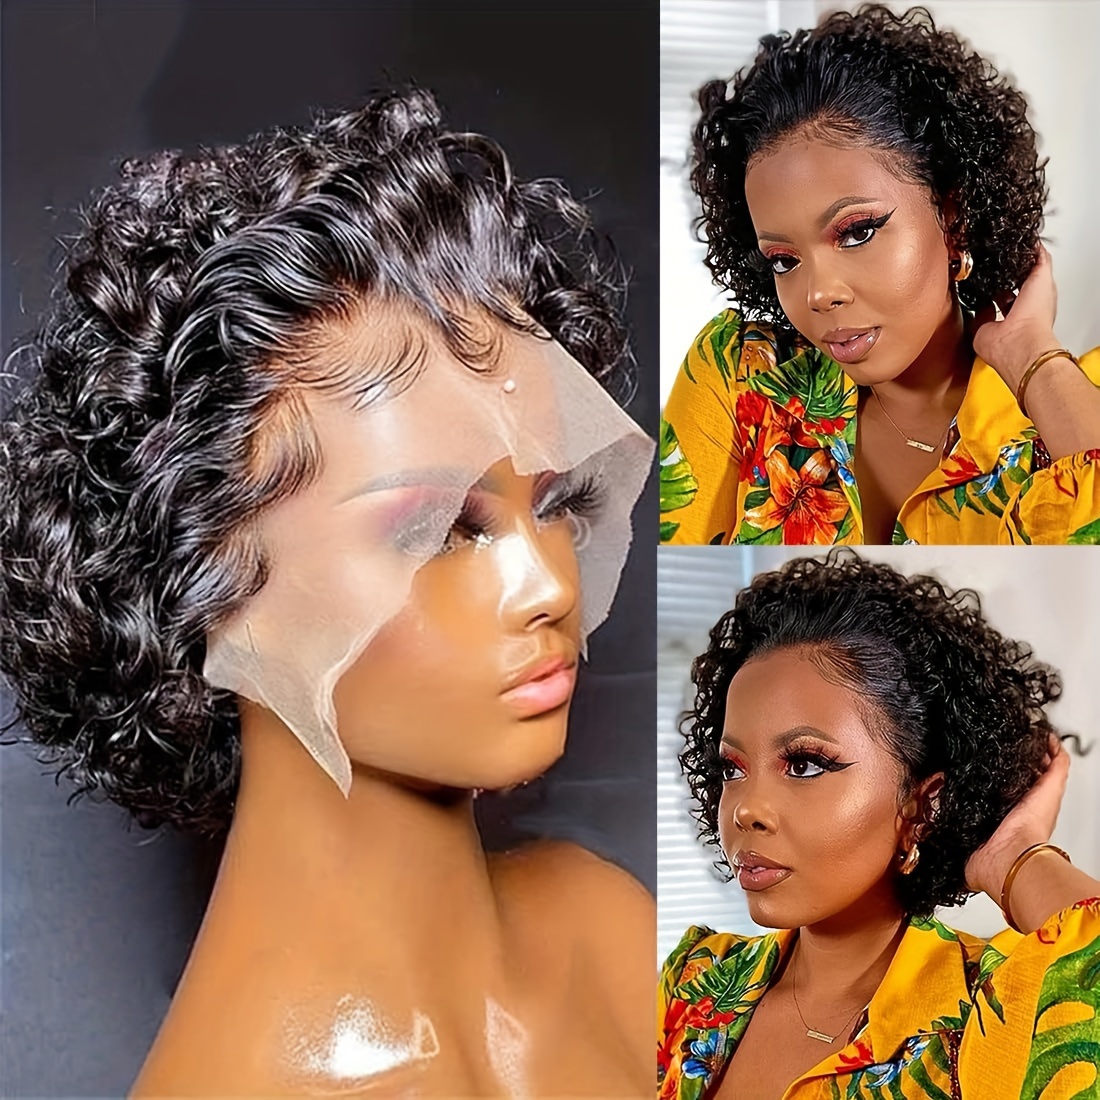 

Short Curly Pixie Cut Wig Human Hair 6 Inch Curly Wave Natural Black Human Hair Wigs For Women 13x1 Lace Front Wig Preplucked 130% Density